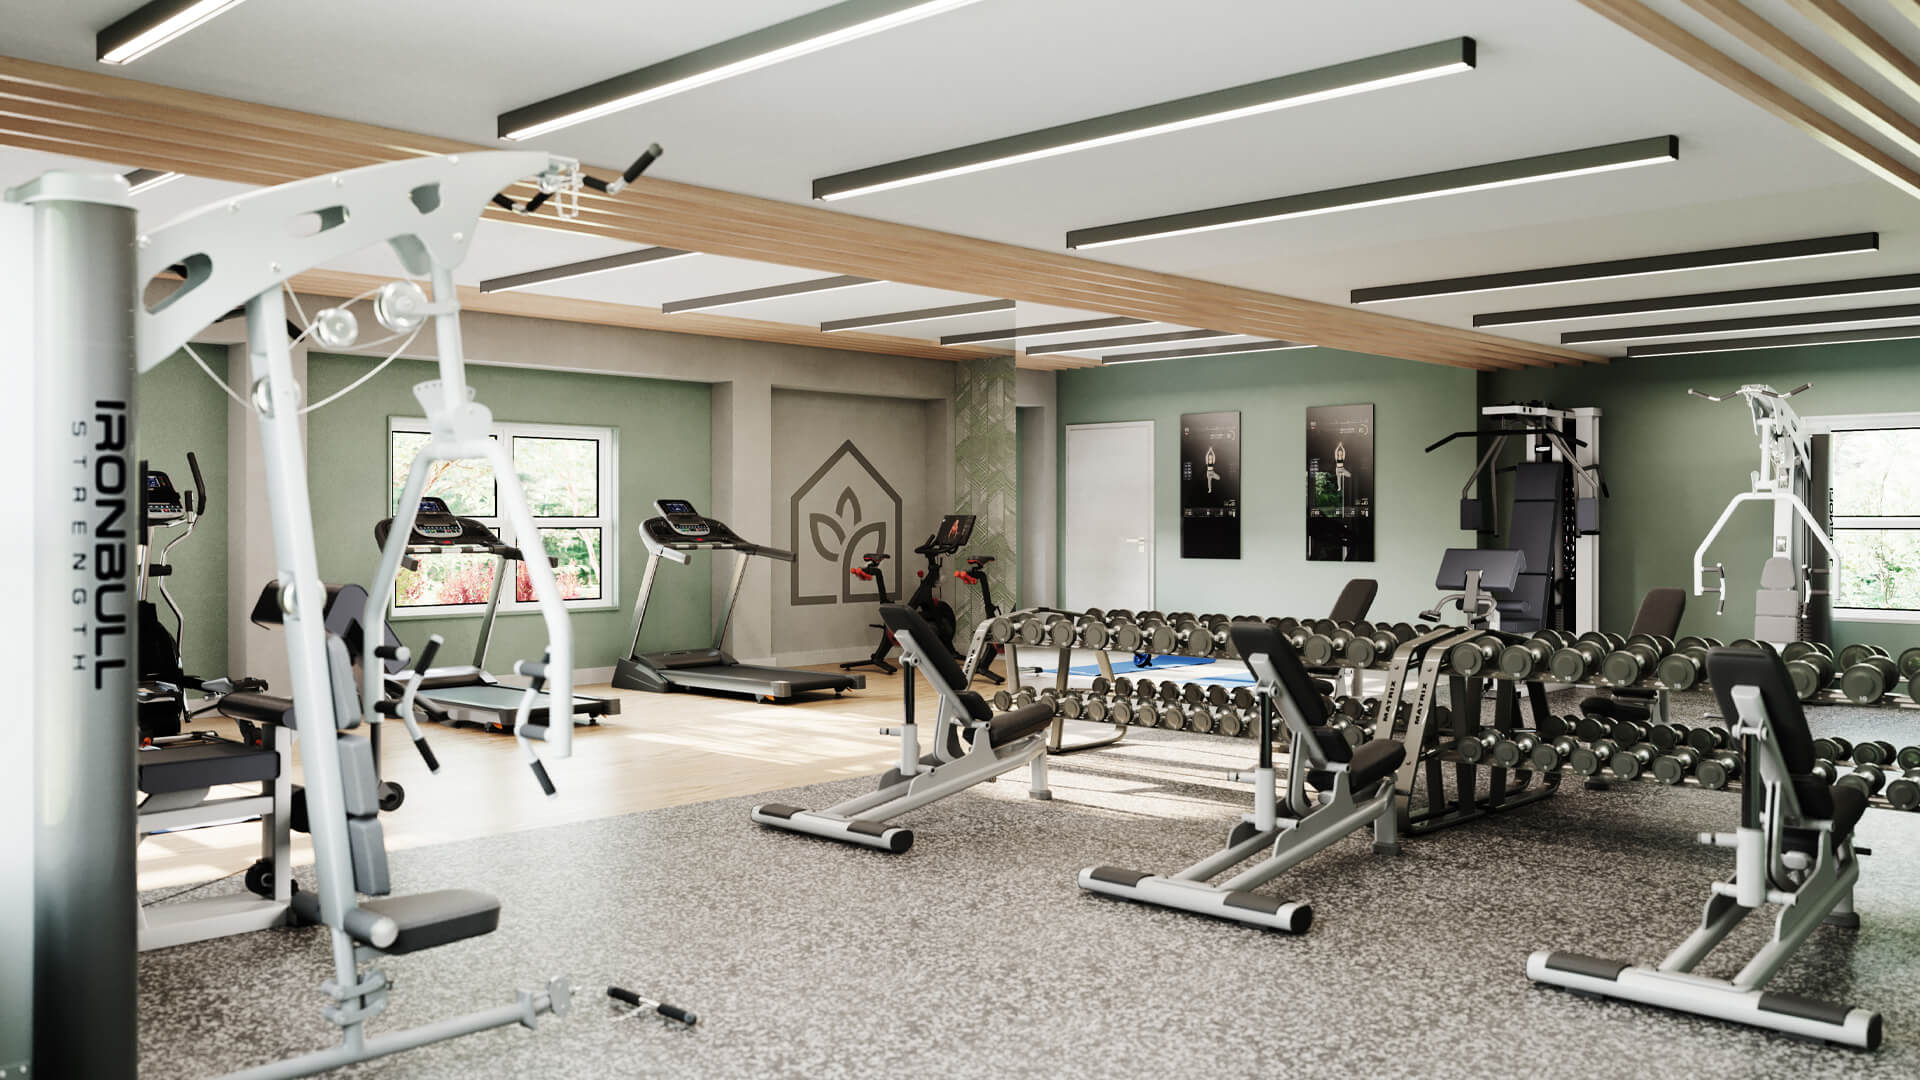 Interior 3D Rendering of a Gym